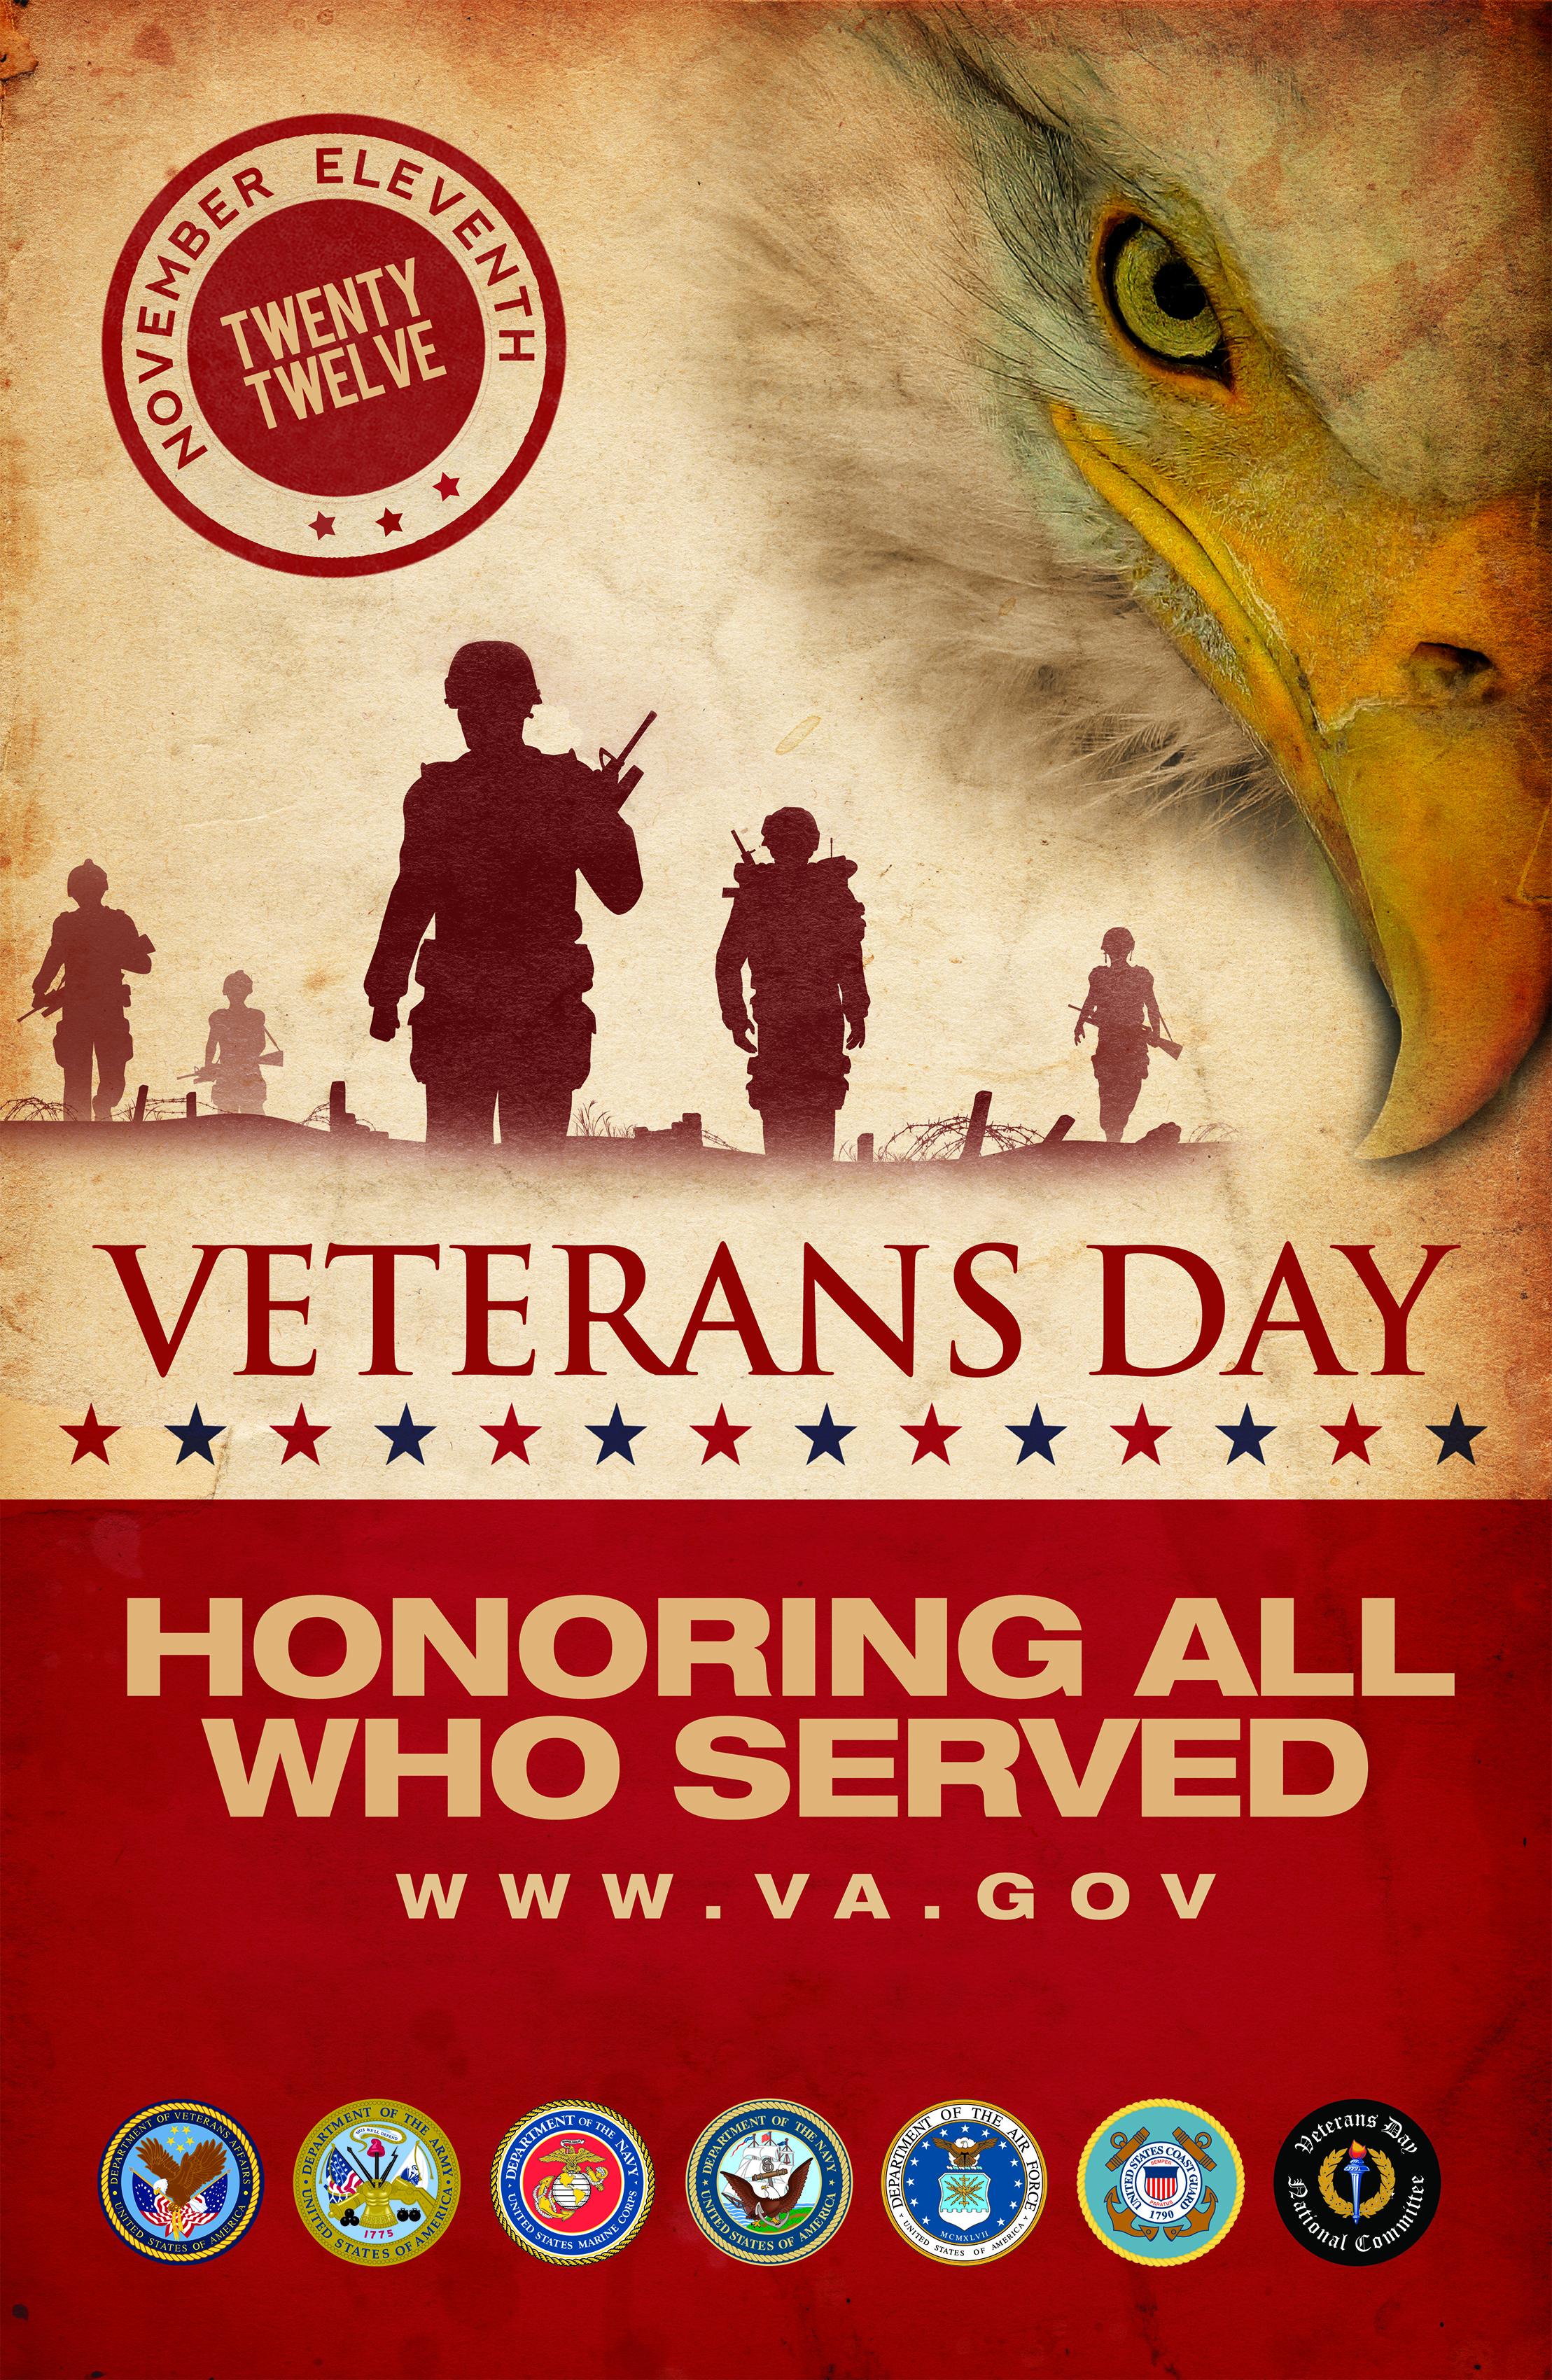 Veterans Day Poster Gallery  Office of Public Affairs